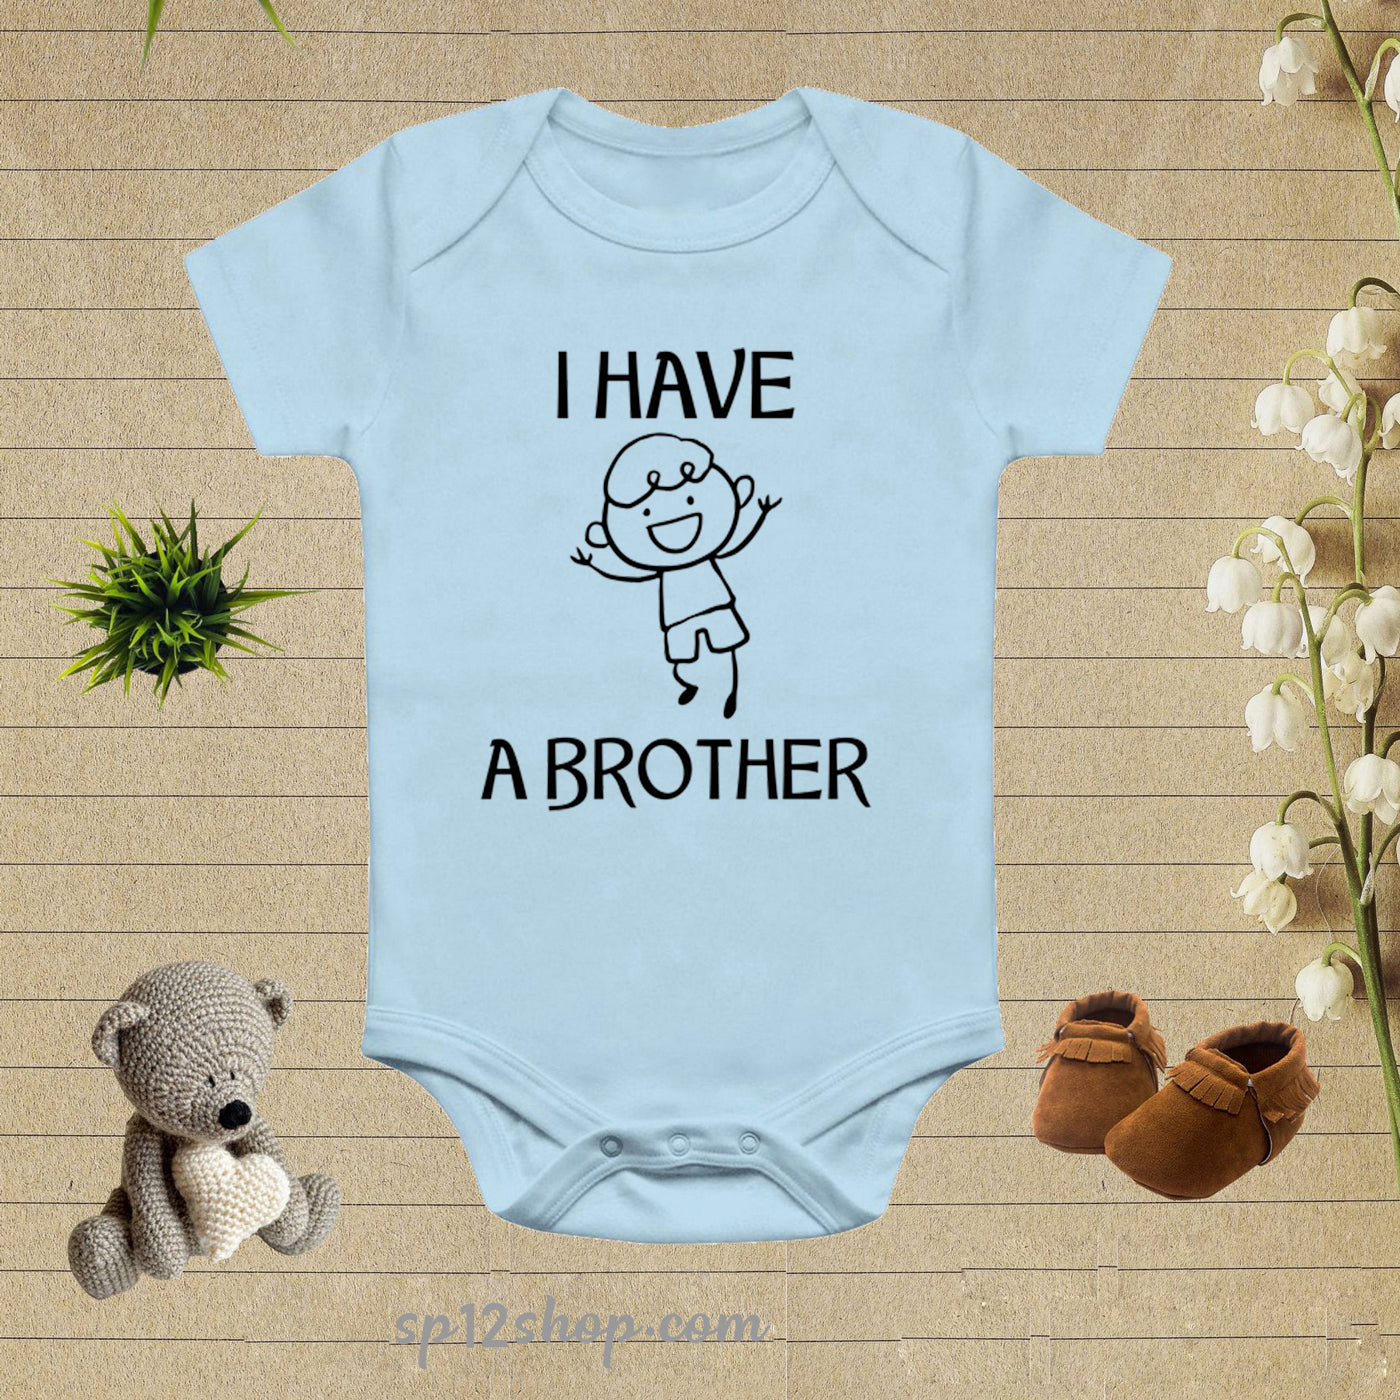 I Have A Brother Funny Baby Bodysuit Onesie